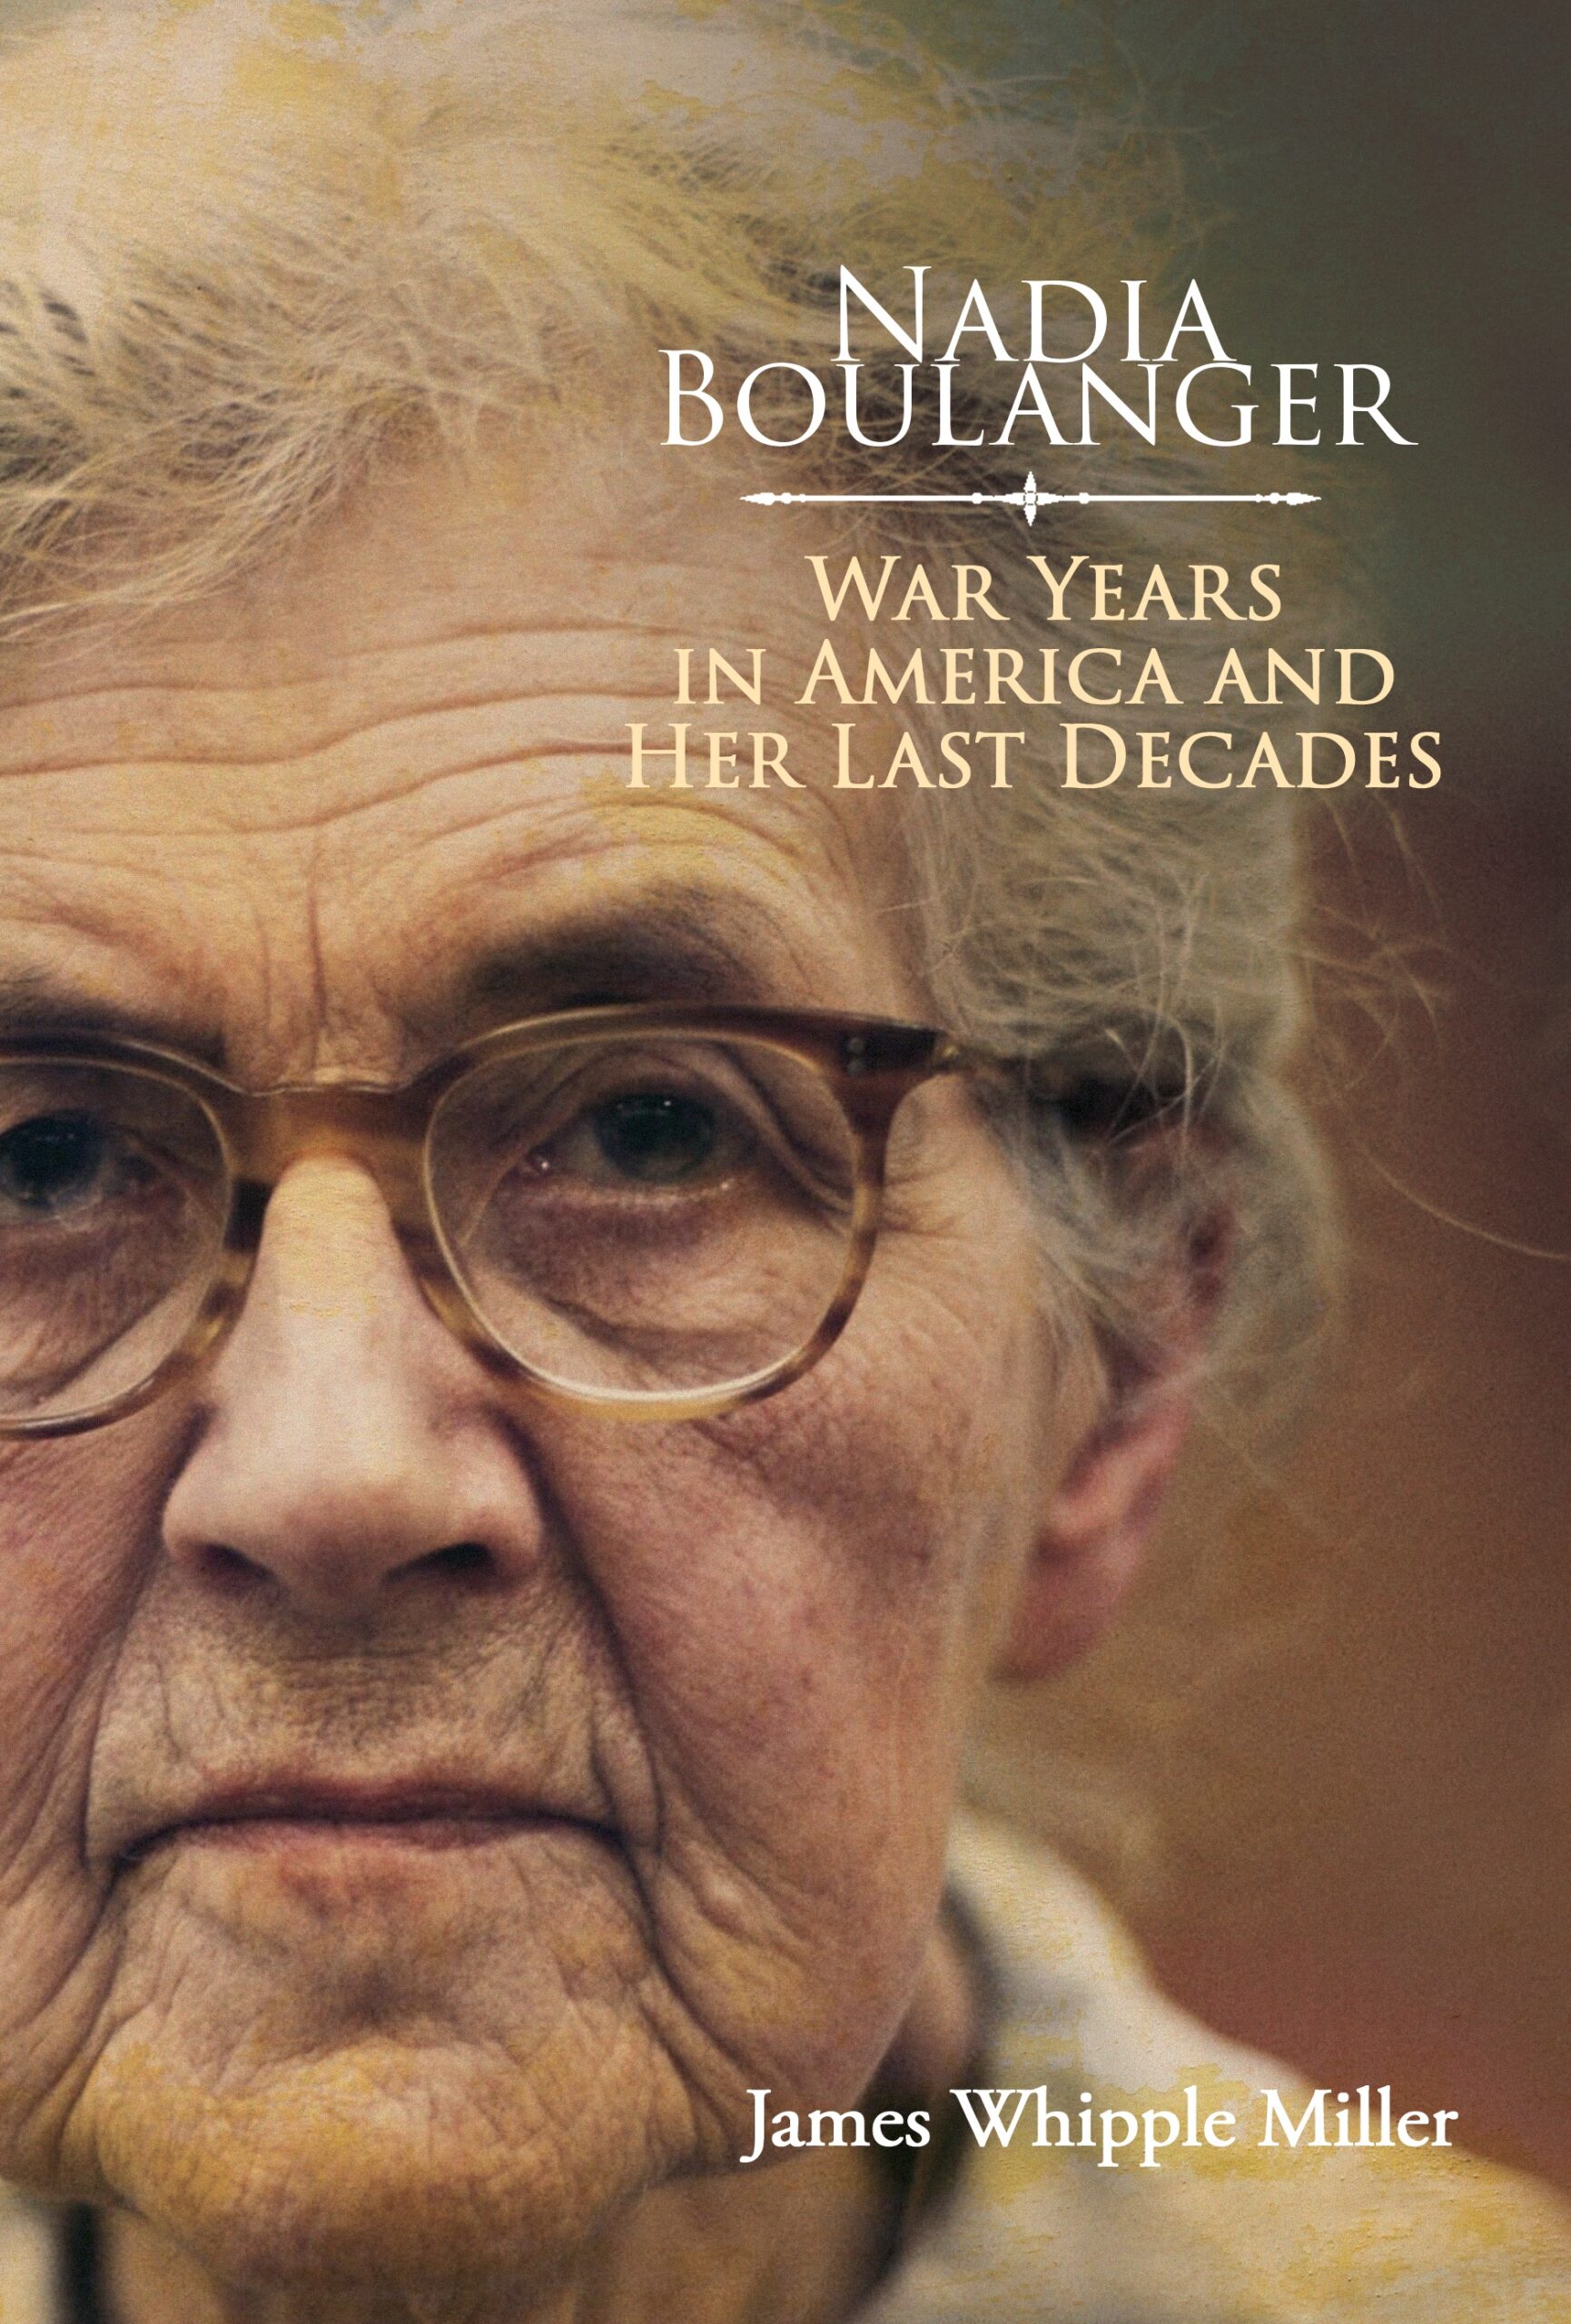 Nadia Boulanger: War Years in America and Her Last Decades by James Whipple Miller